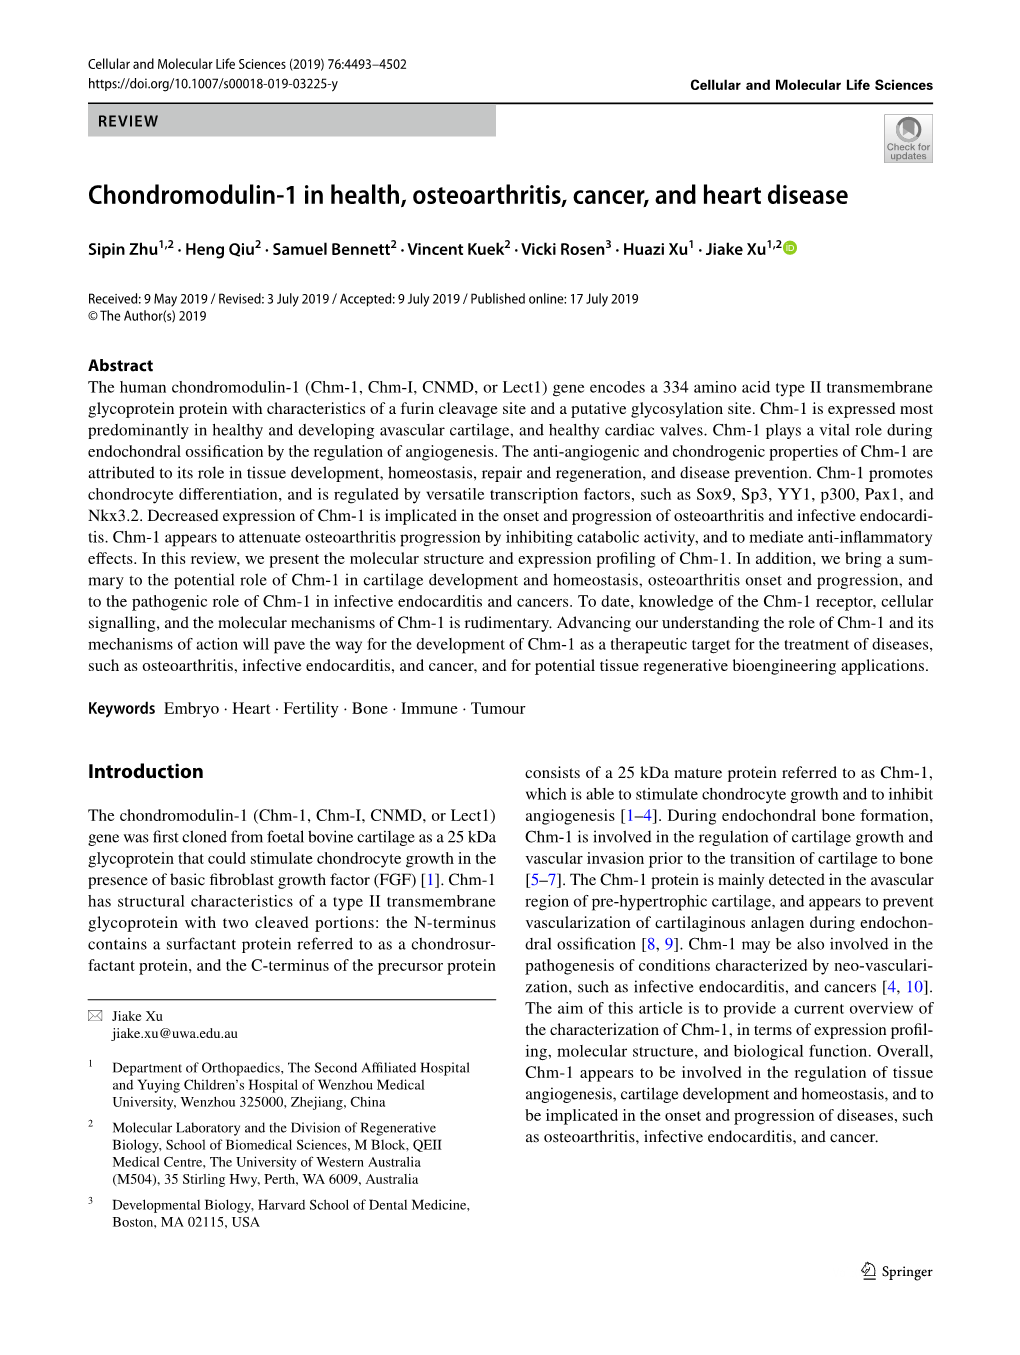 Chondromodulin-1 in Health, Osteoarthritis, Cancer, and Heart